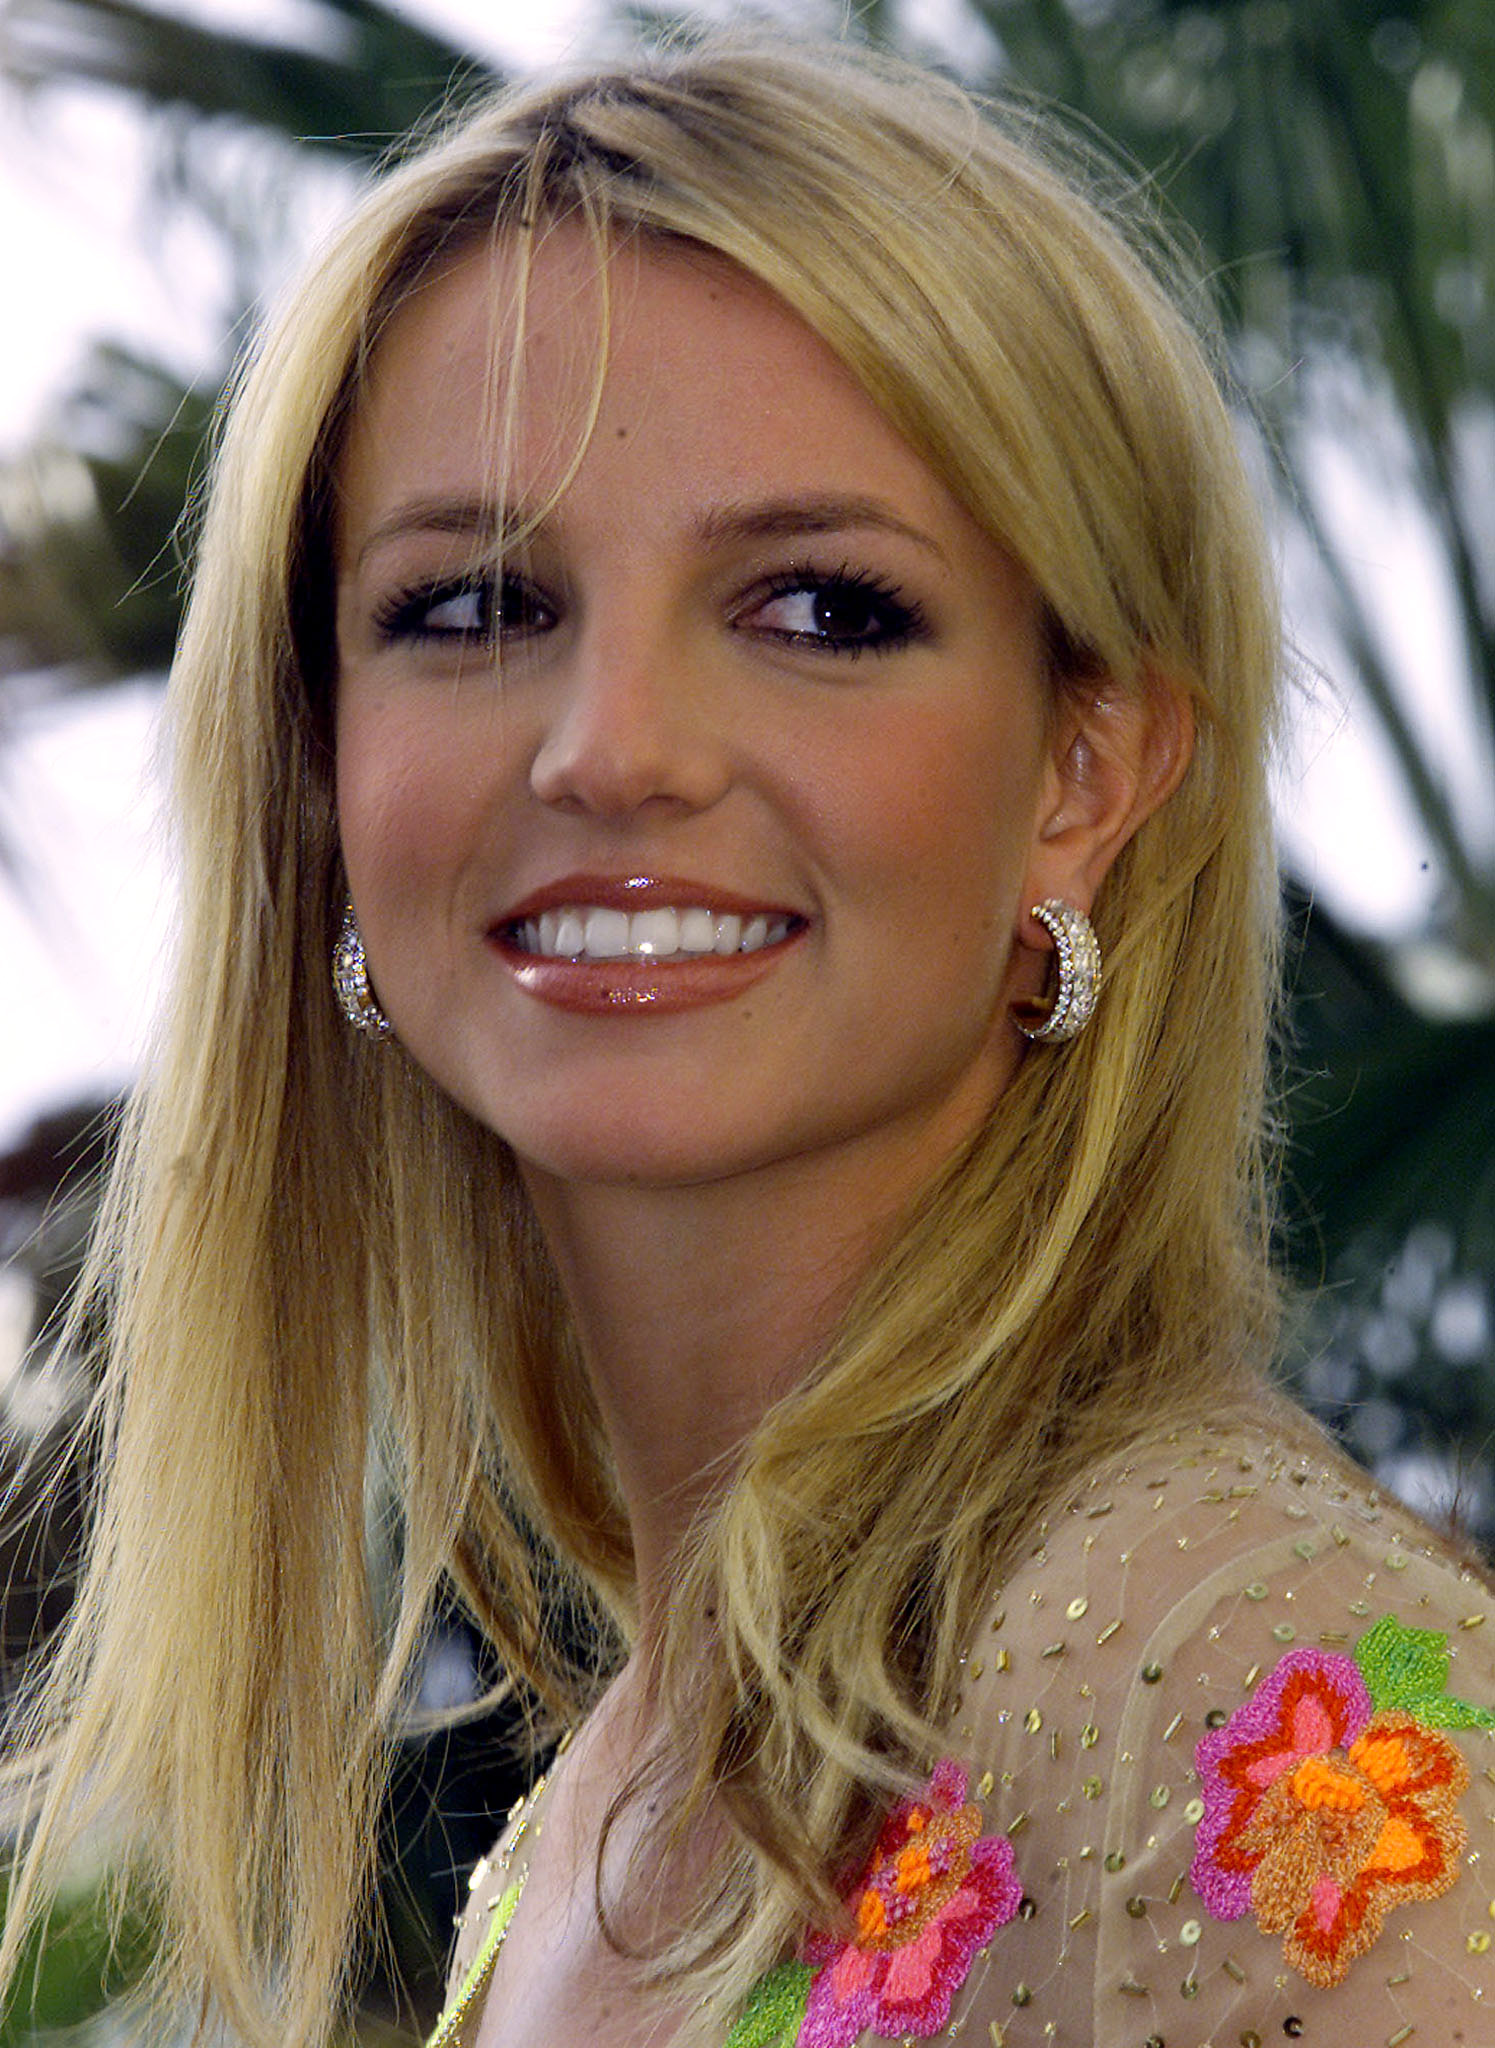 U.S. pop princess Britney Spears smiles during a photocall in Cannes January 19, 2002. Britney Spears is in Cannes to attend the MIDEM.